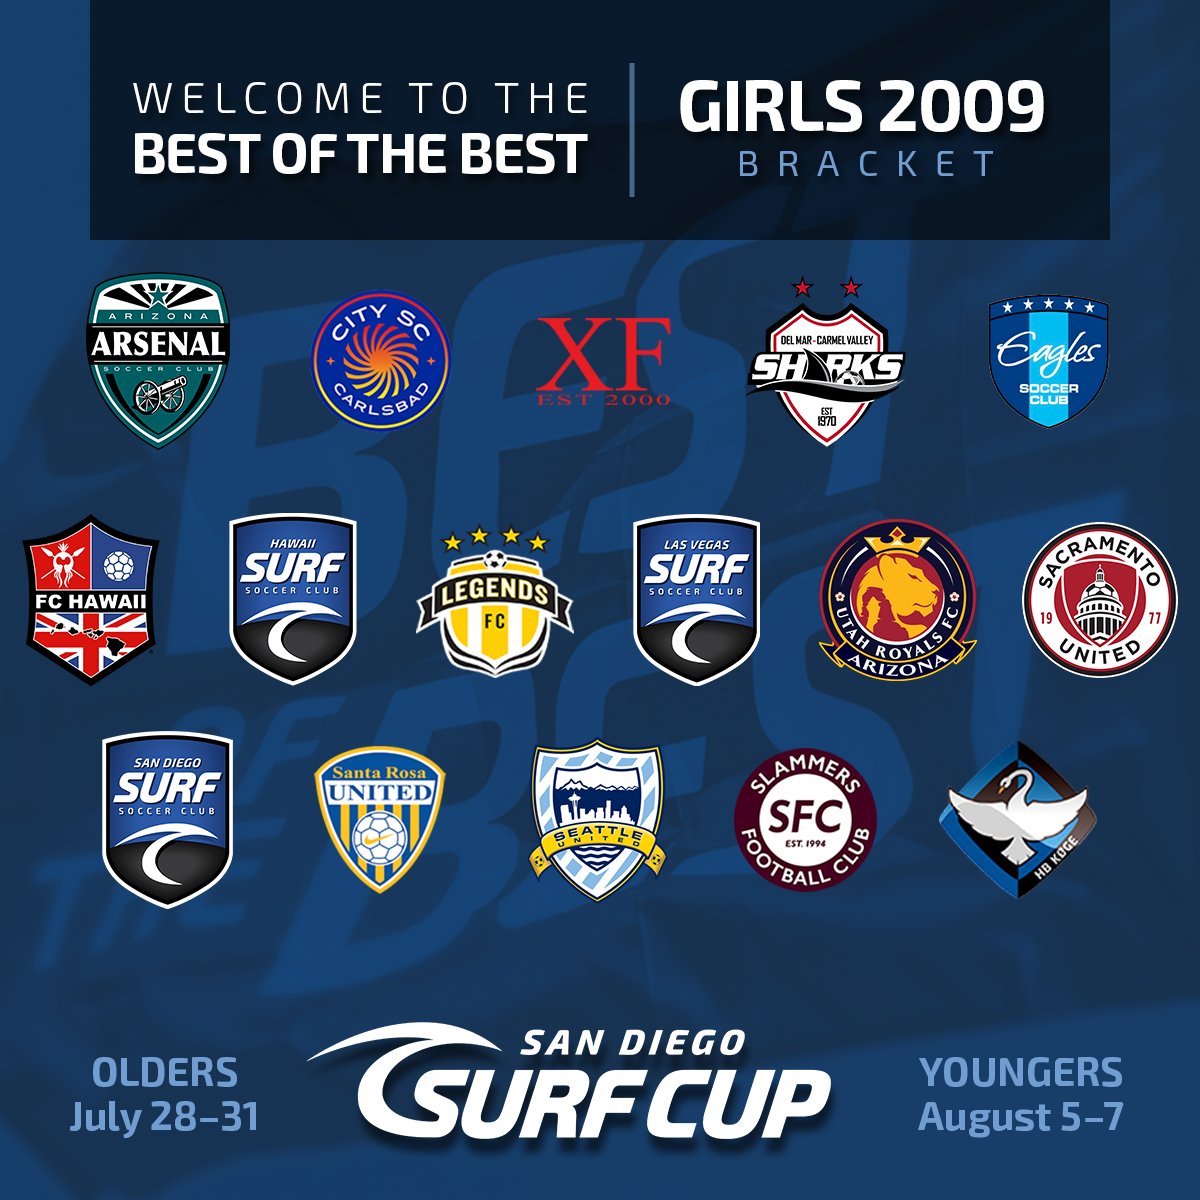 #SurfCup is thrilled to announce our 2009 Boys & Girls #BestOfTheBest Brackets! With FIVE days to go, we're gearing up to host the nation's top clubs and huge matchups! We cannot wait to hand out the 🏆 to the #BestOfTheBest!